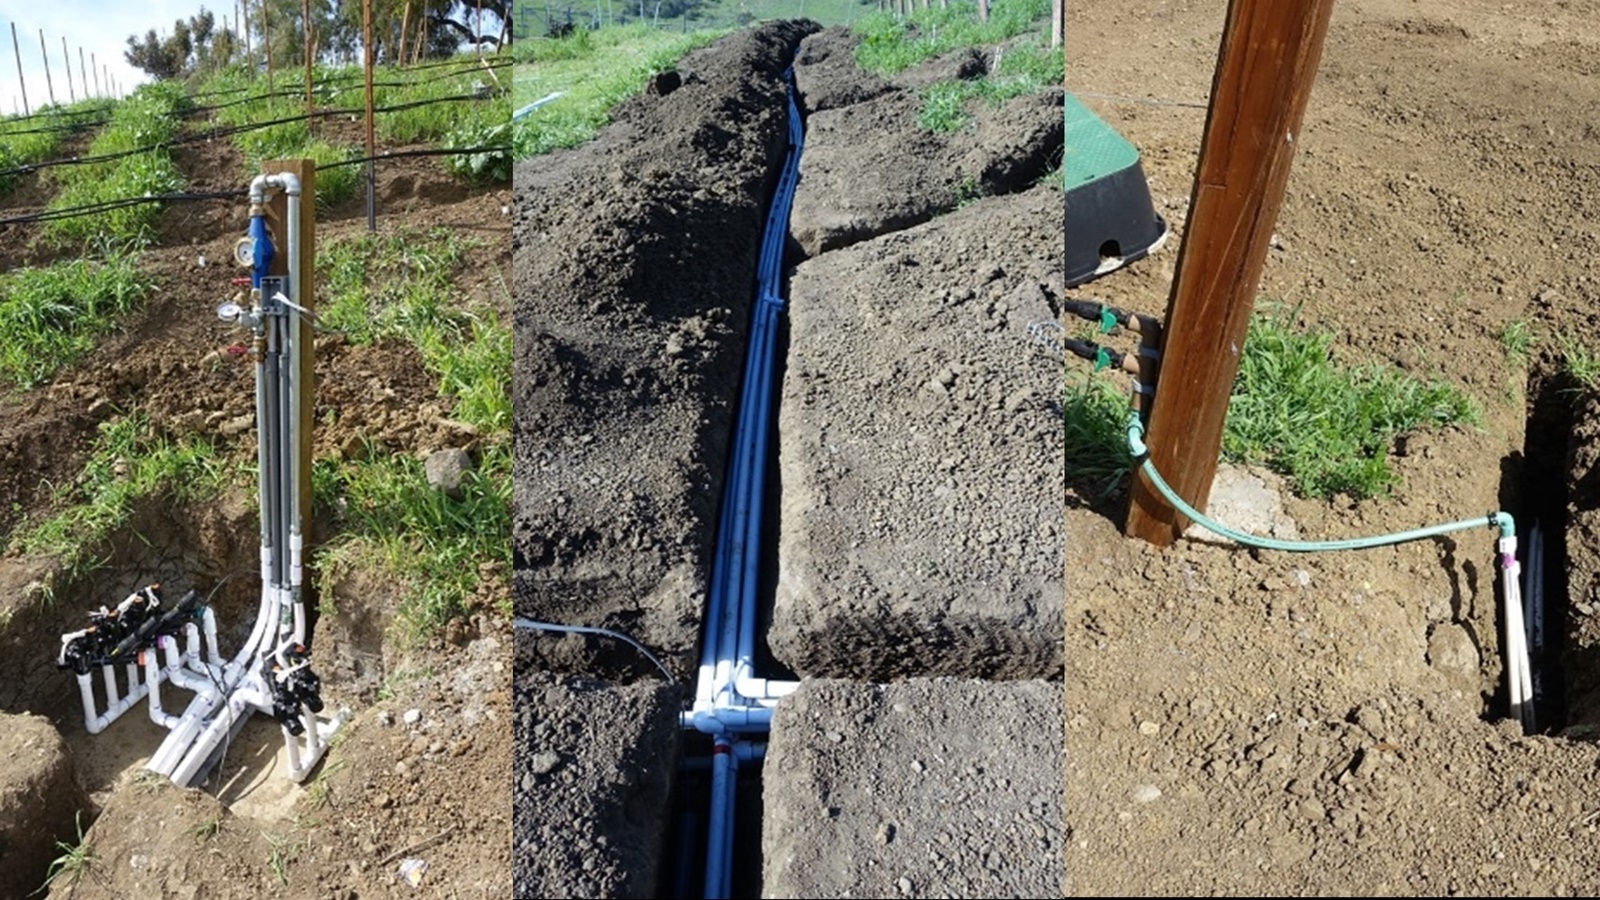 12. Irrigation controls and piping